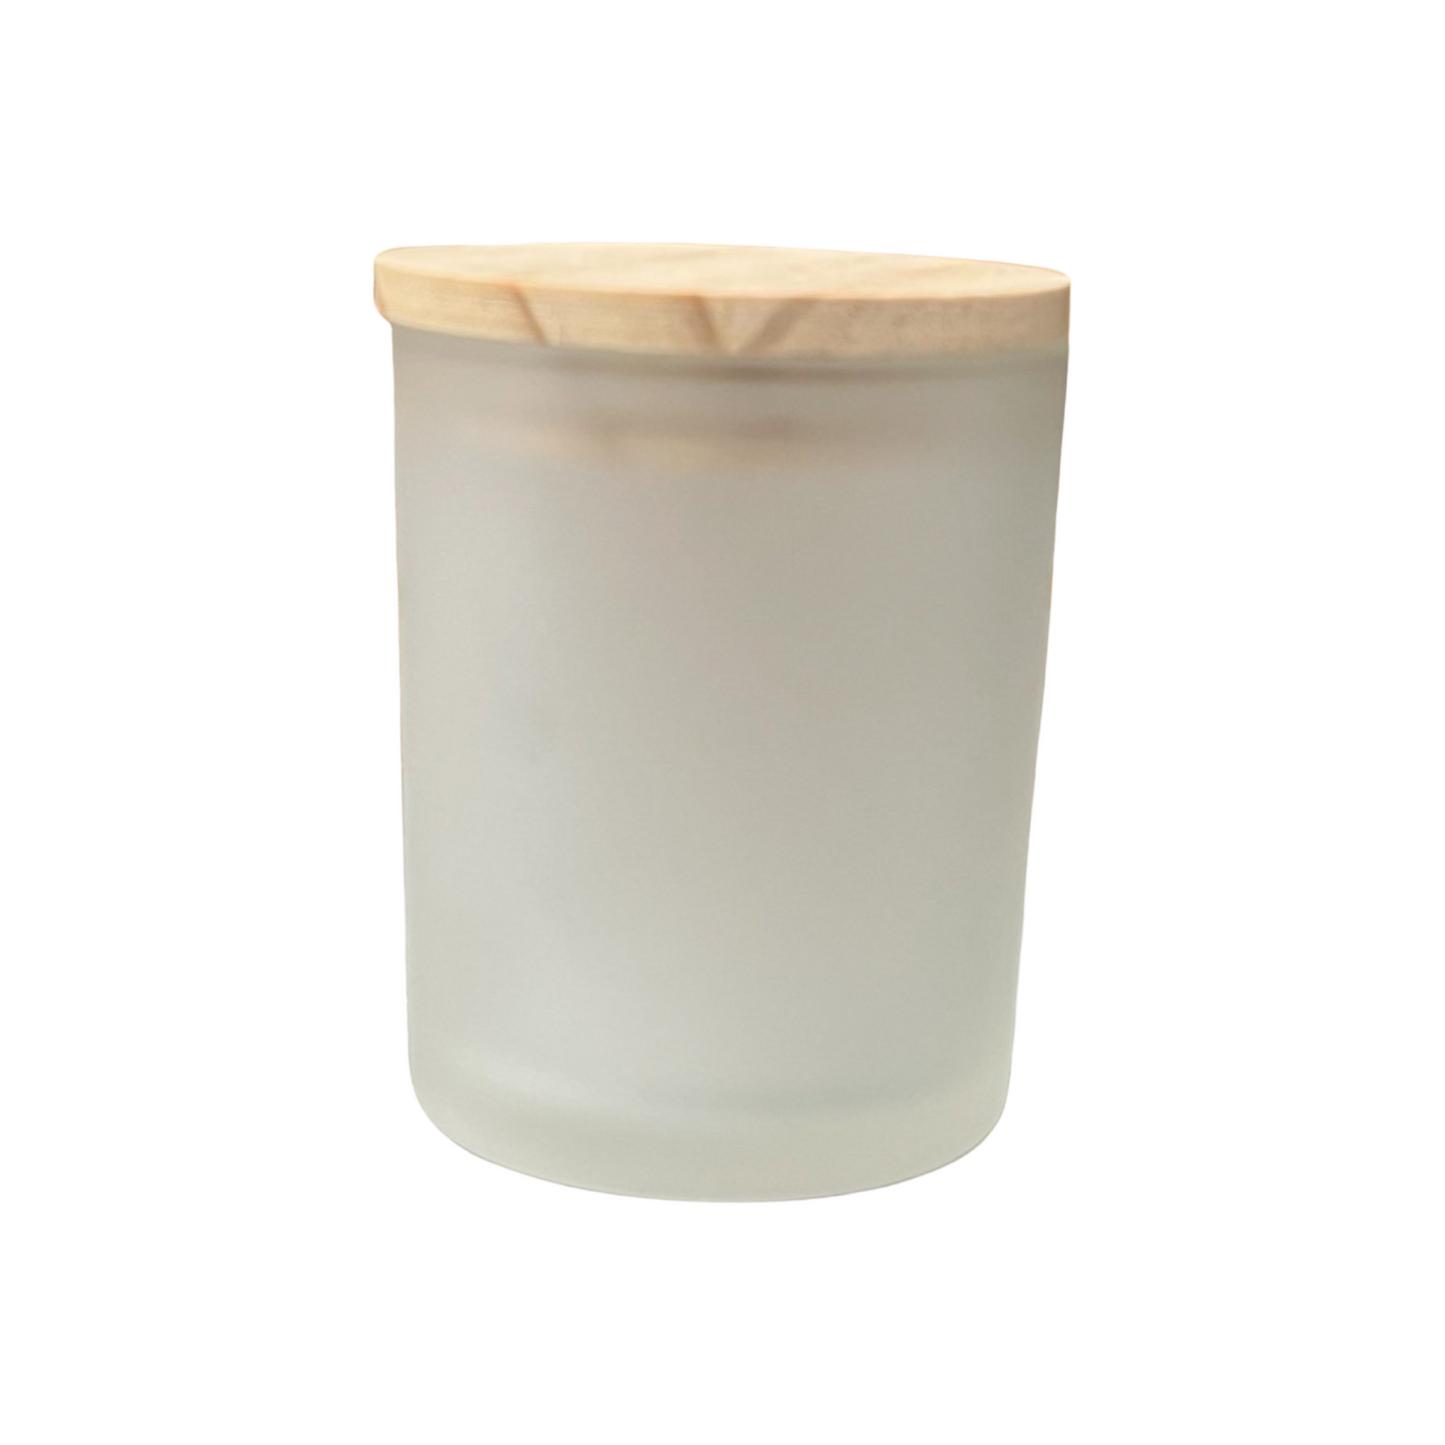 CANDLE CUP 8 OZ WOOD CAP 1 PC